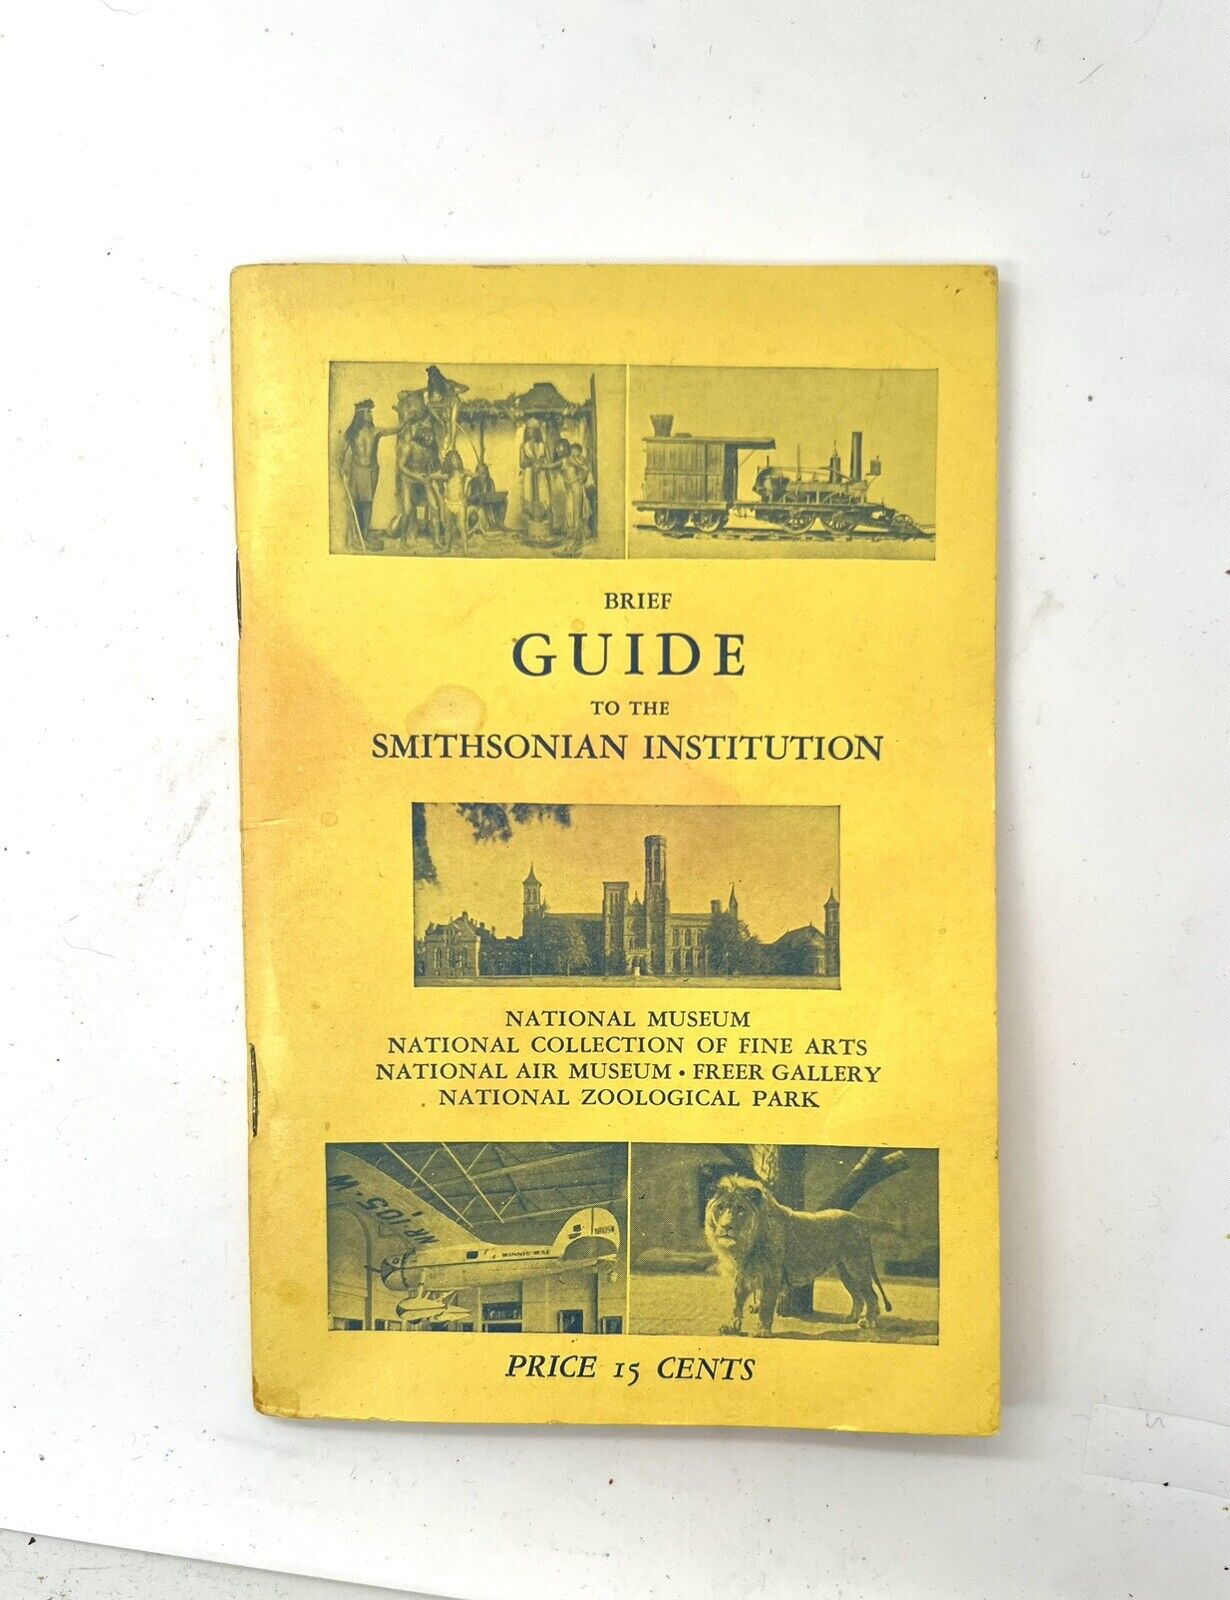 VINTAGE 1950s BRIEF GUIDE SMITHSONIAN INSTITUTION 8th edition Booklet